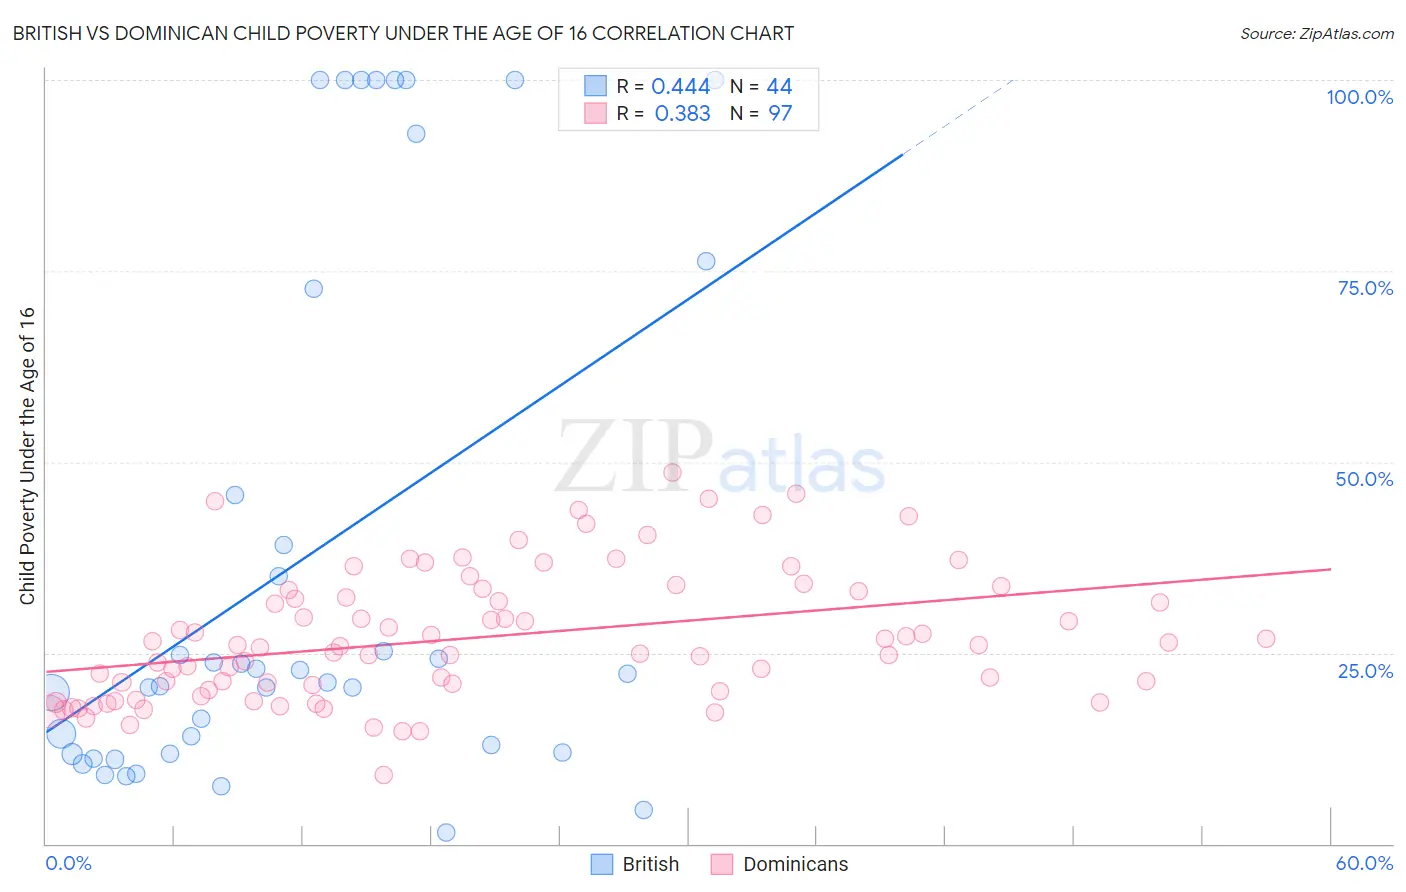 British vs Dominican Child Poverty Under the Age of 16